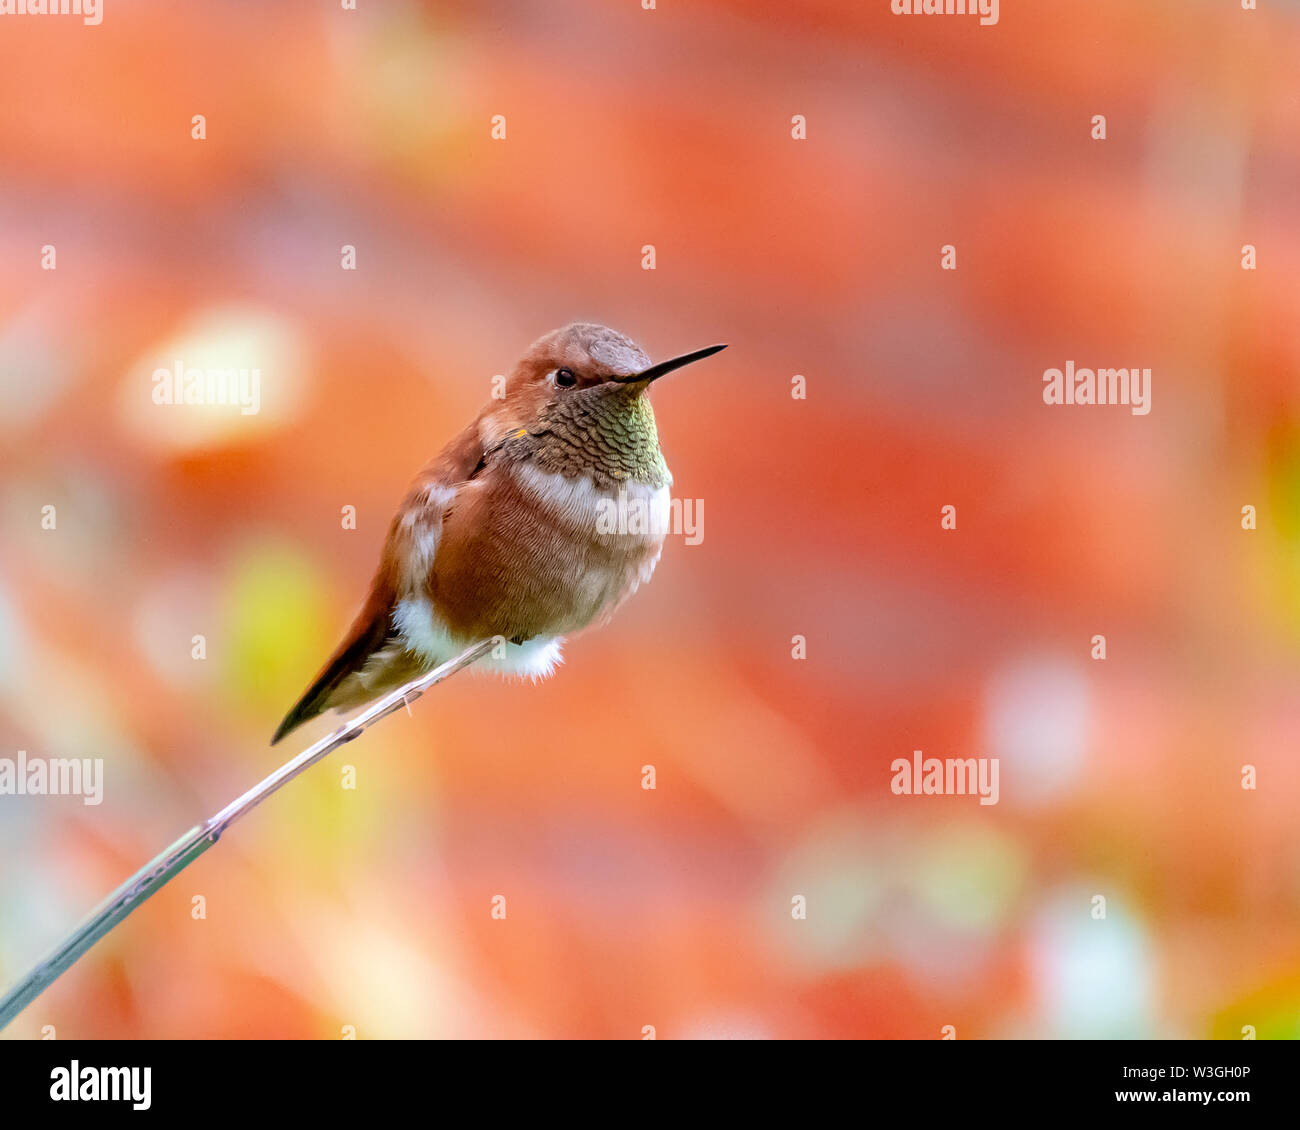 Humming bird perched at the end of a tree branch - orange tones Stock Photo